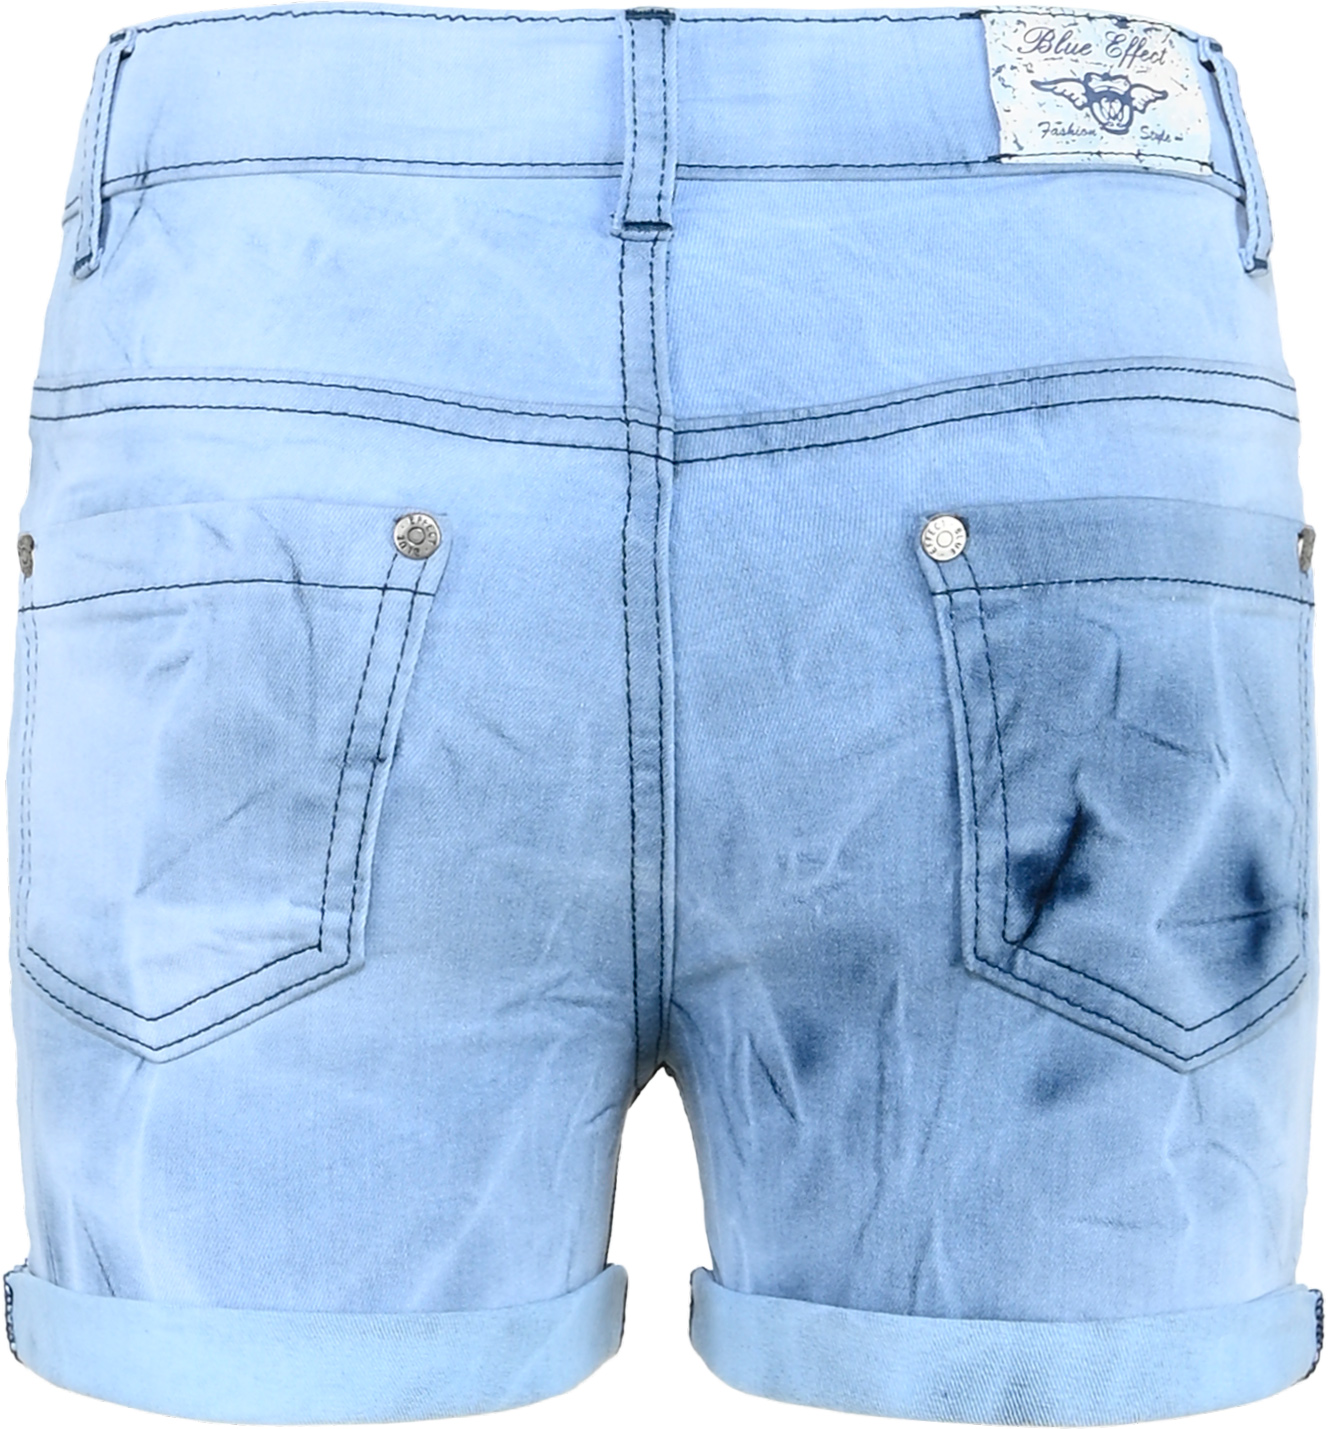 3129-Girls High-Waist Short available in Slim, Normal